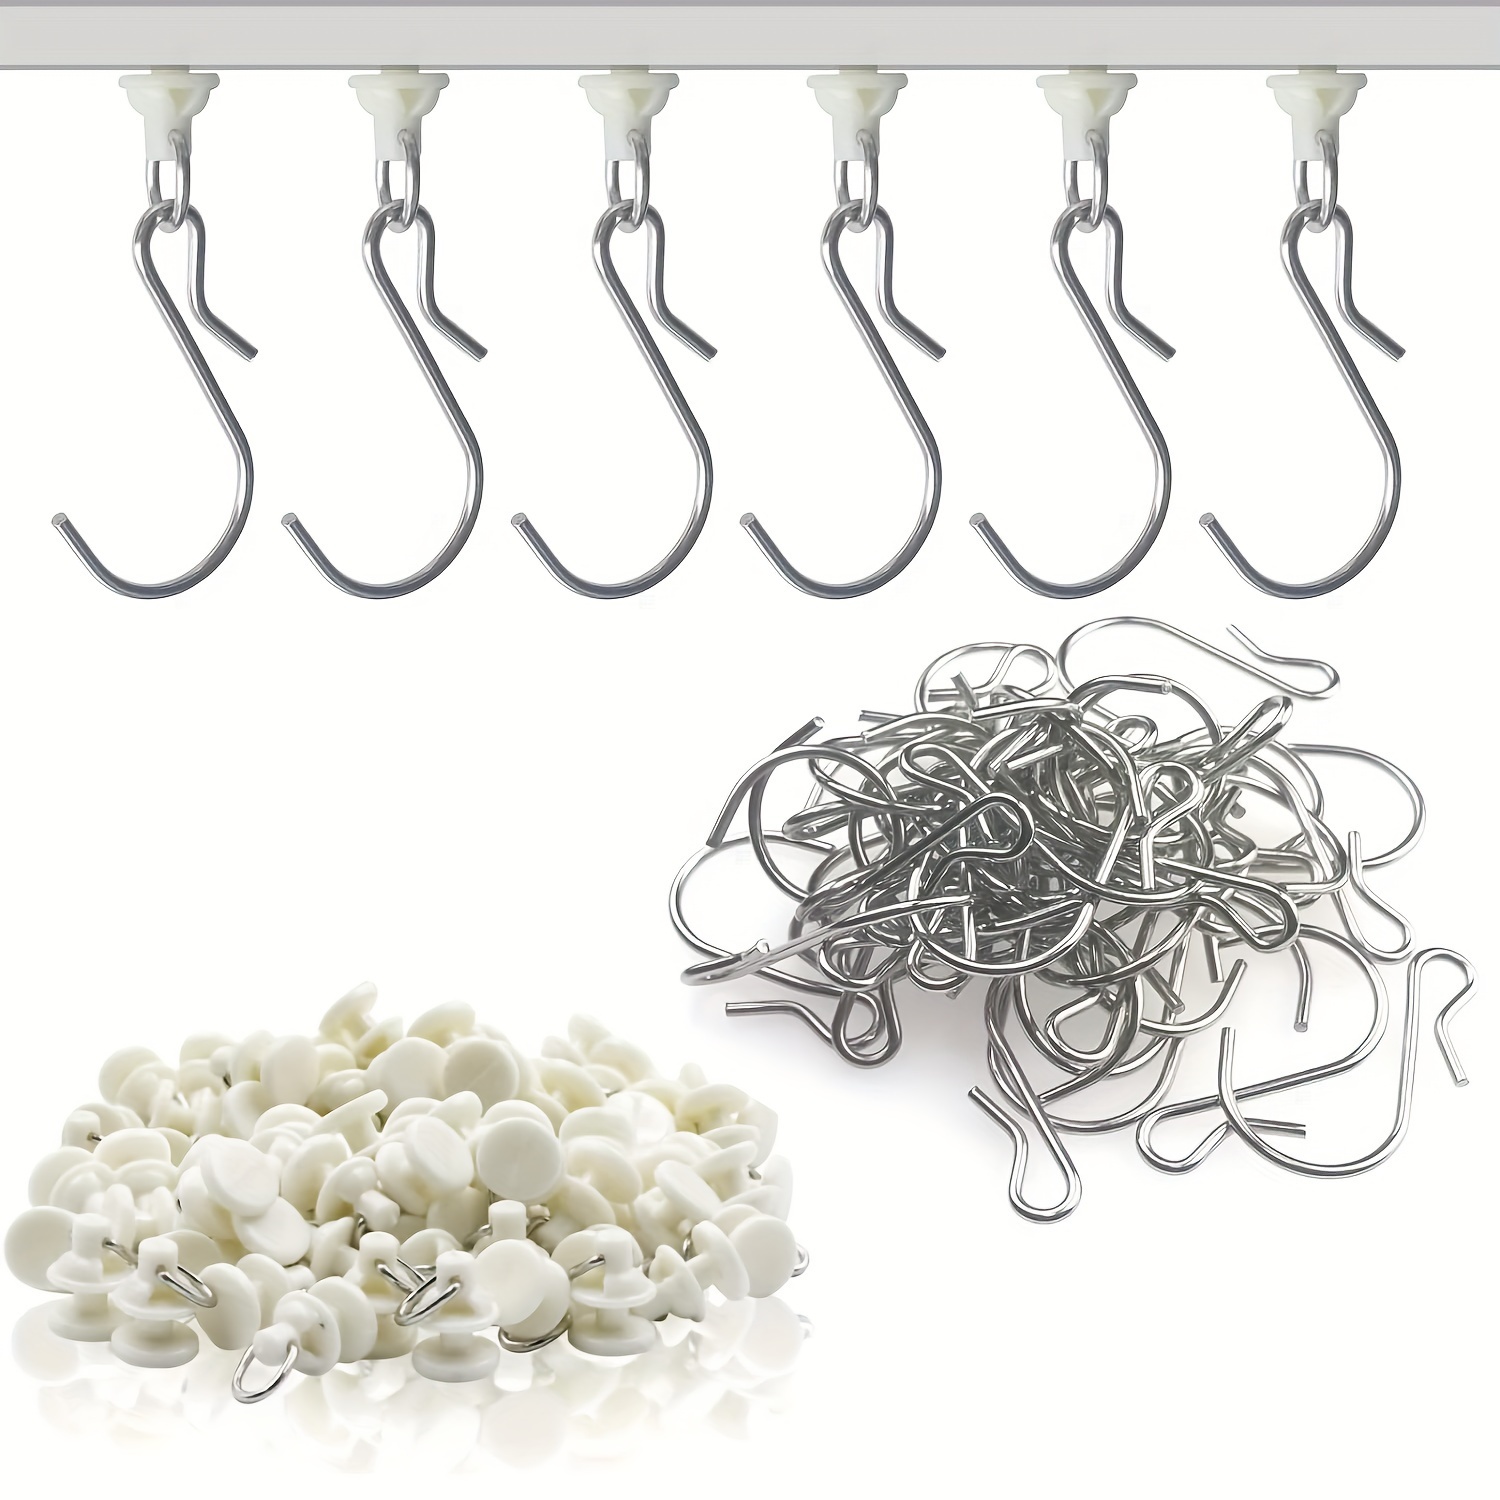 50pcs Curtain Pulley Plastic Curtain Gliders + Curtain Hooks Glider Curtain  Hooks Rail Sliding Hooks For Window Curtains Door Curtain Shower Curtains